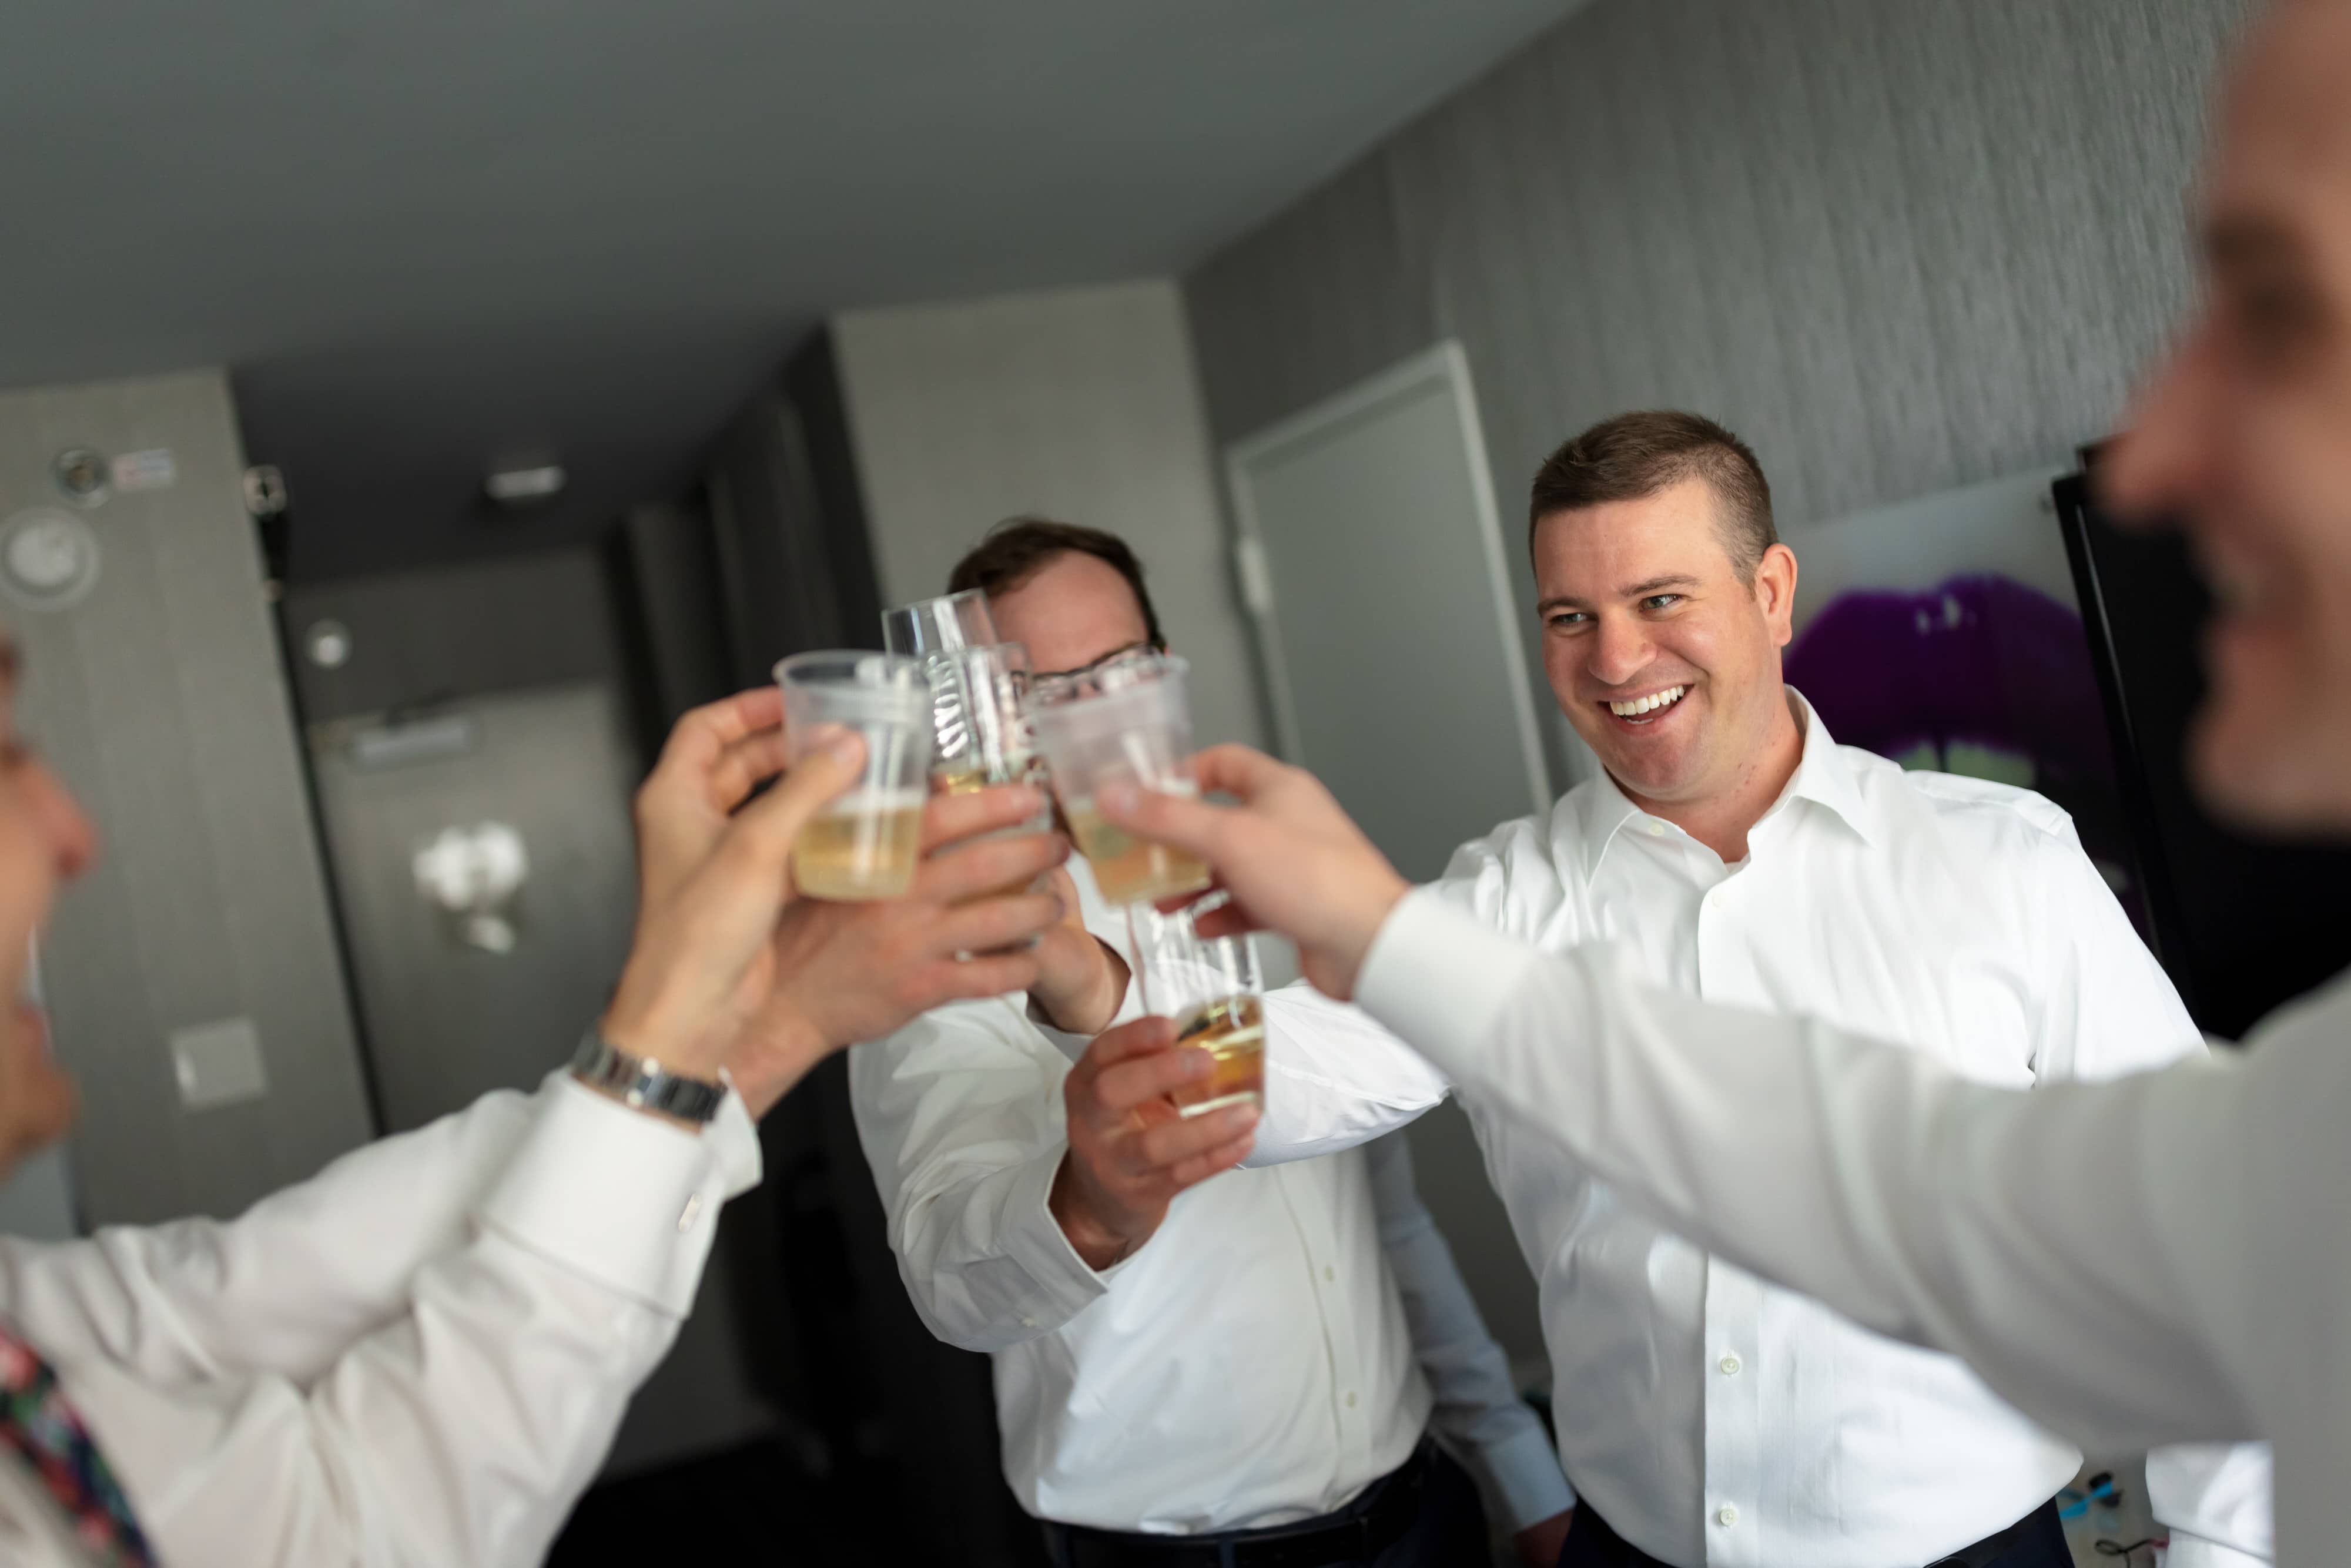 Groom and groomsmen make a toast before leaving for wedding ceremony